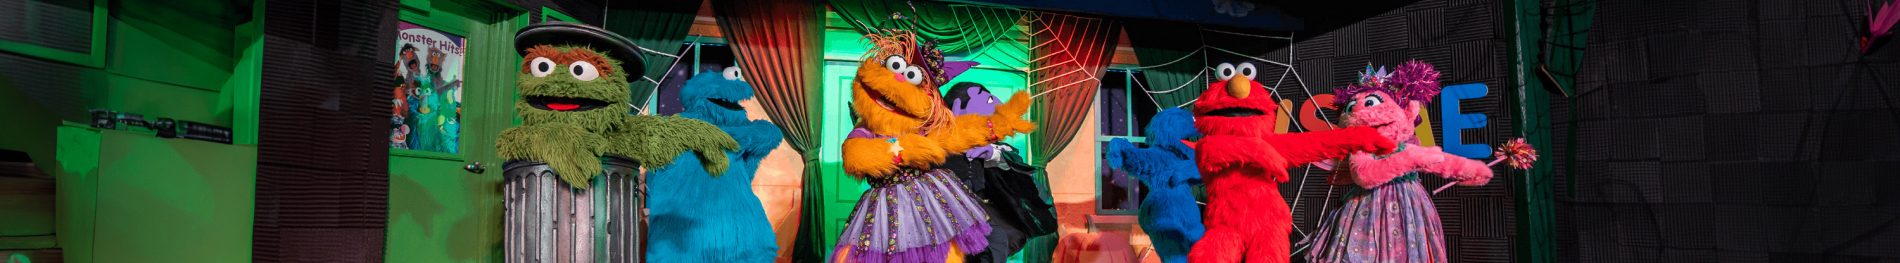 Count von Count serves as the master of scare-emonies as he leads Elmo, Cookie Monster, Abby Cadabby, and their friends through some of his favorite tunes.